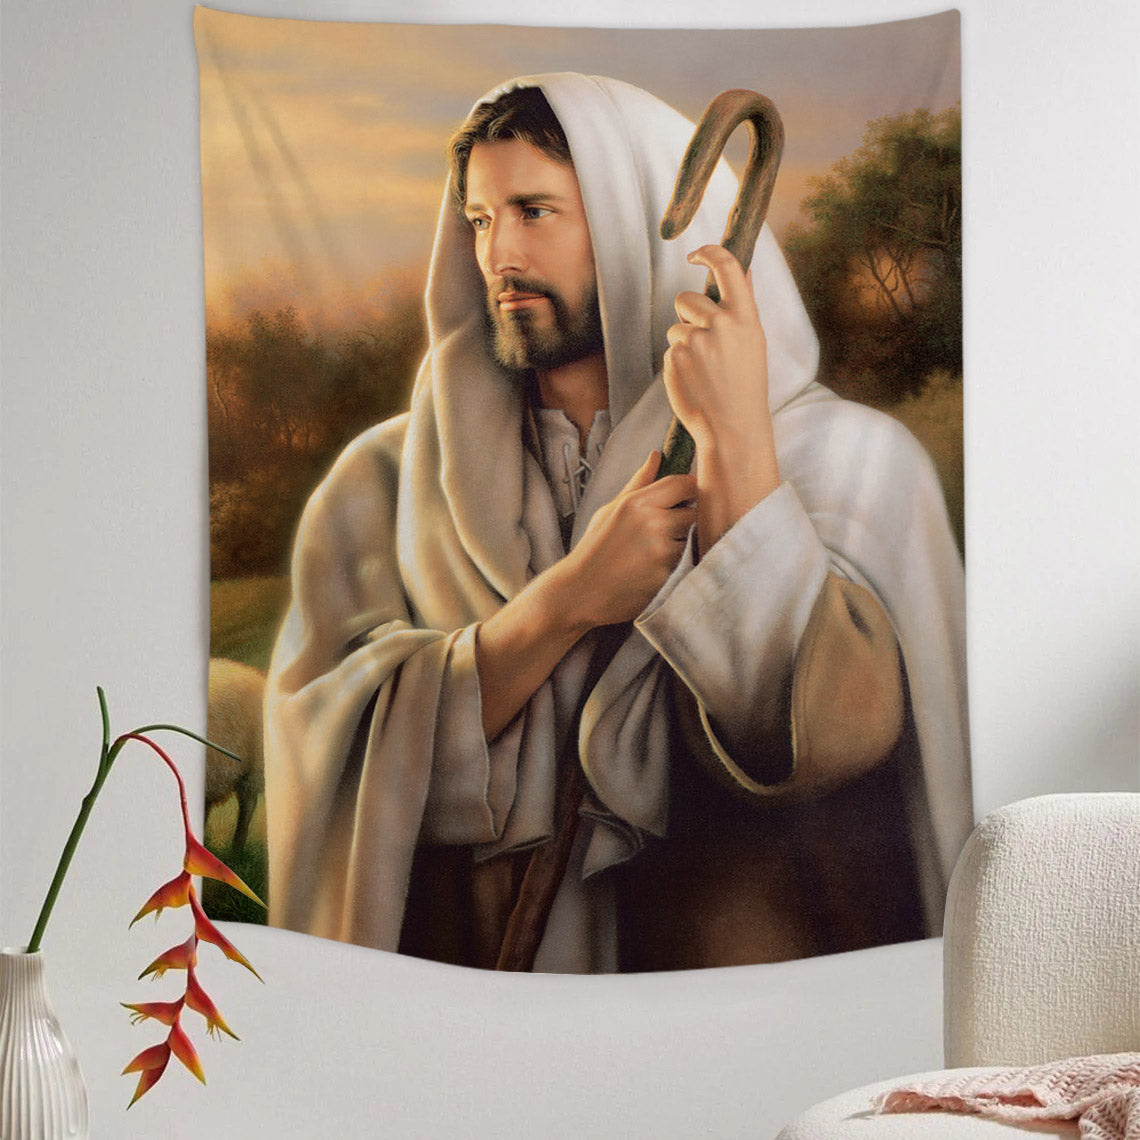 The Good Shepherd Tapestry - Jesus Picture - Religious Tapestry - Christian Tapestry Wall Hangings